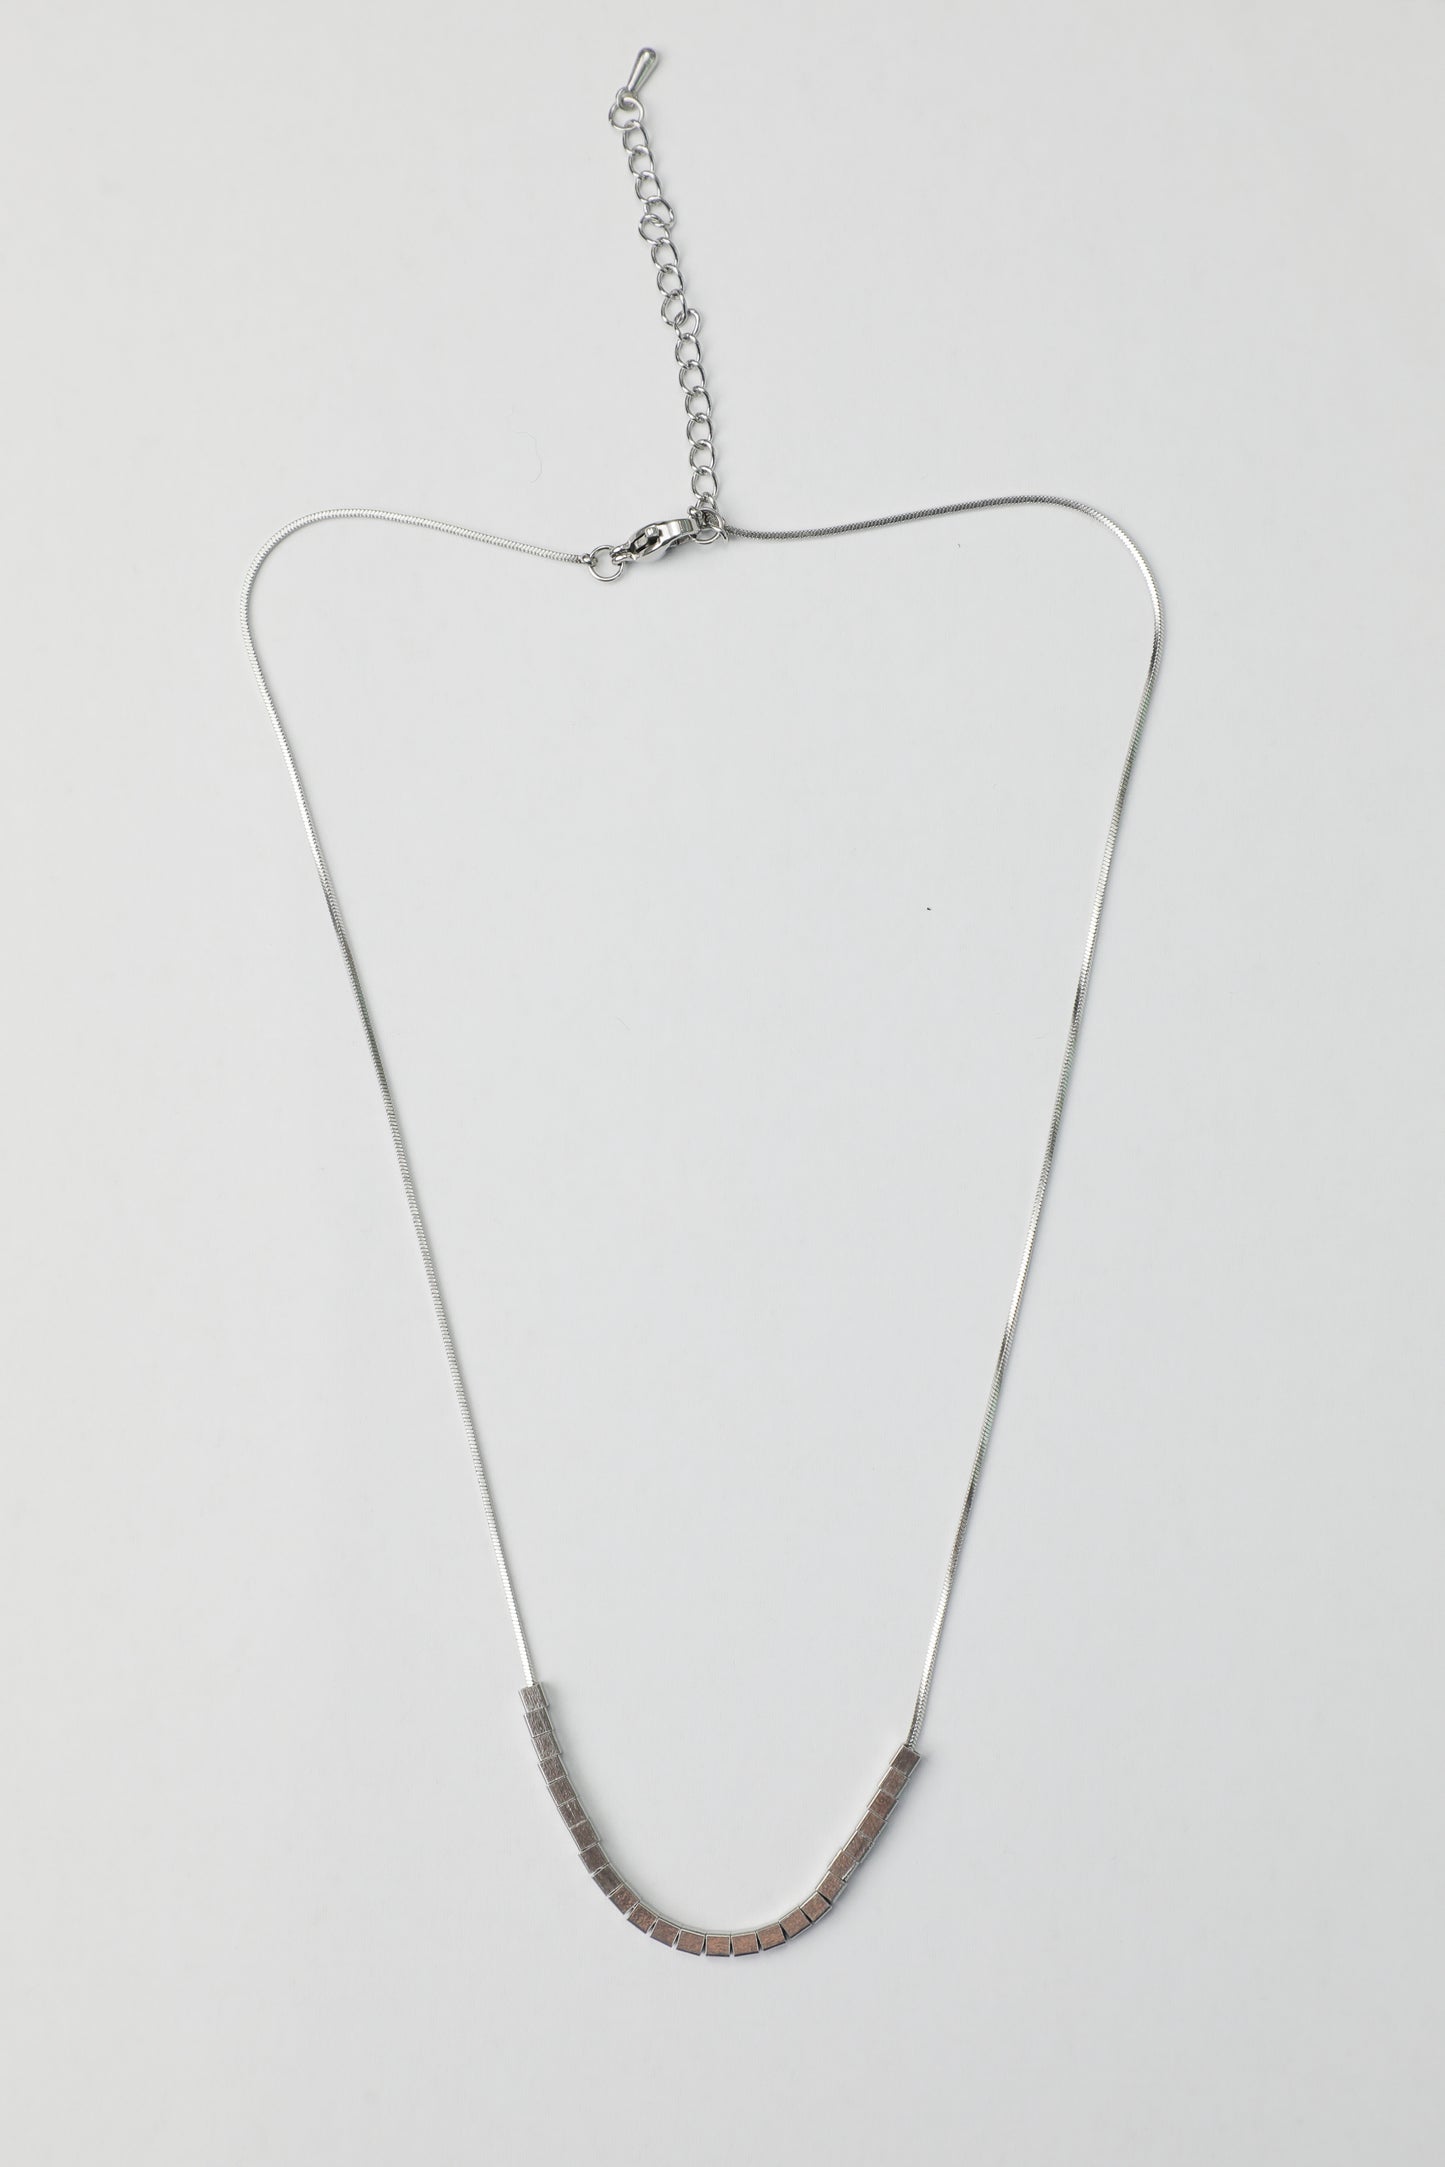 Silver Square Bead Necklace